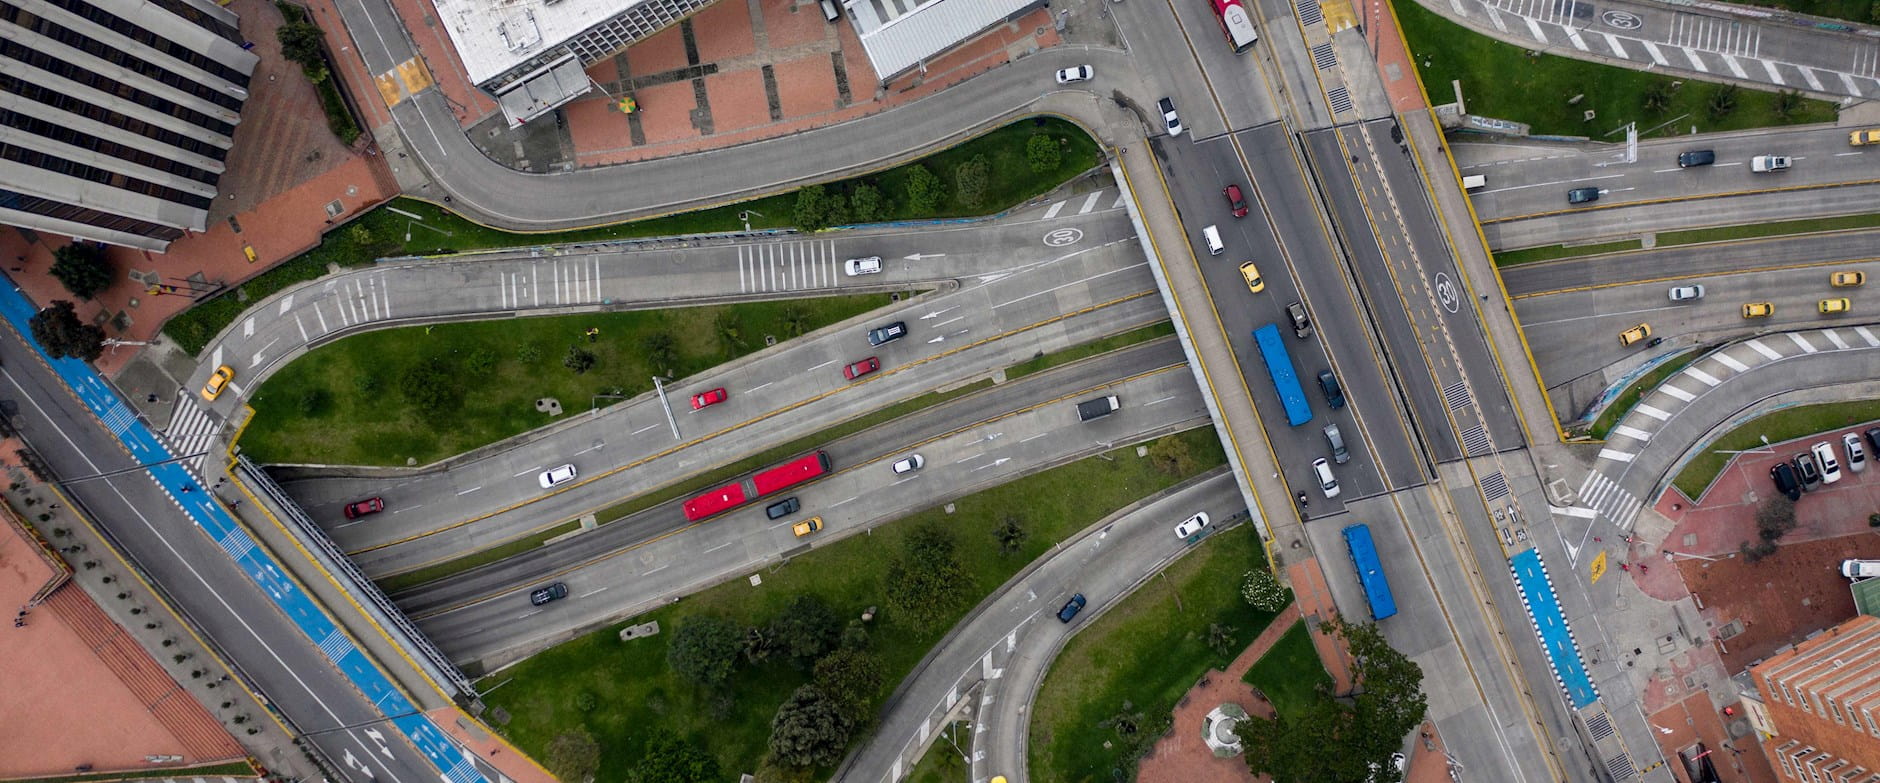 Aerial view of Bogota Colombia showing busses and cars on streets and highways